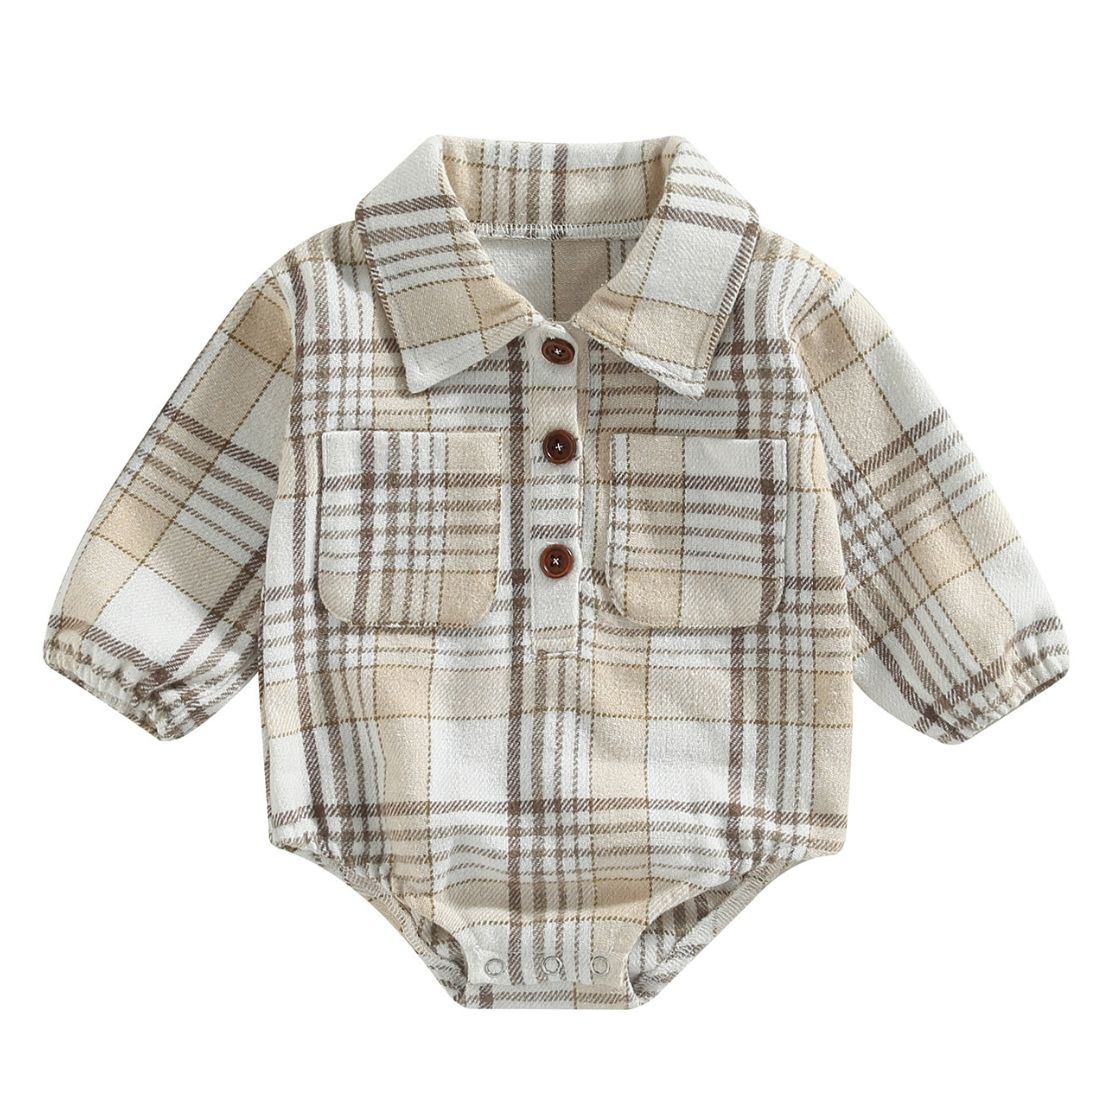 A baby boy earthy beige plaid bodysuit with two front pockets and easy snap clips